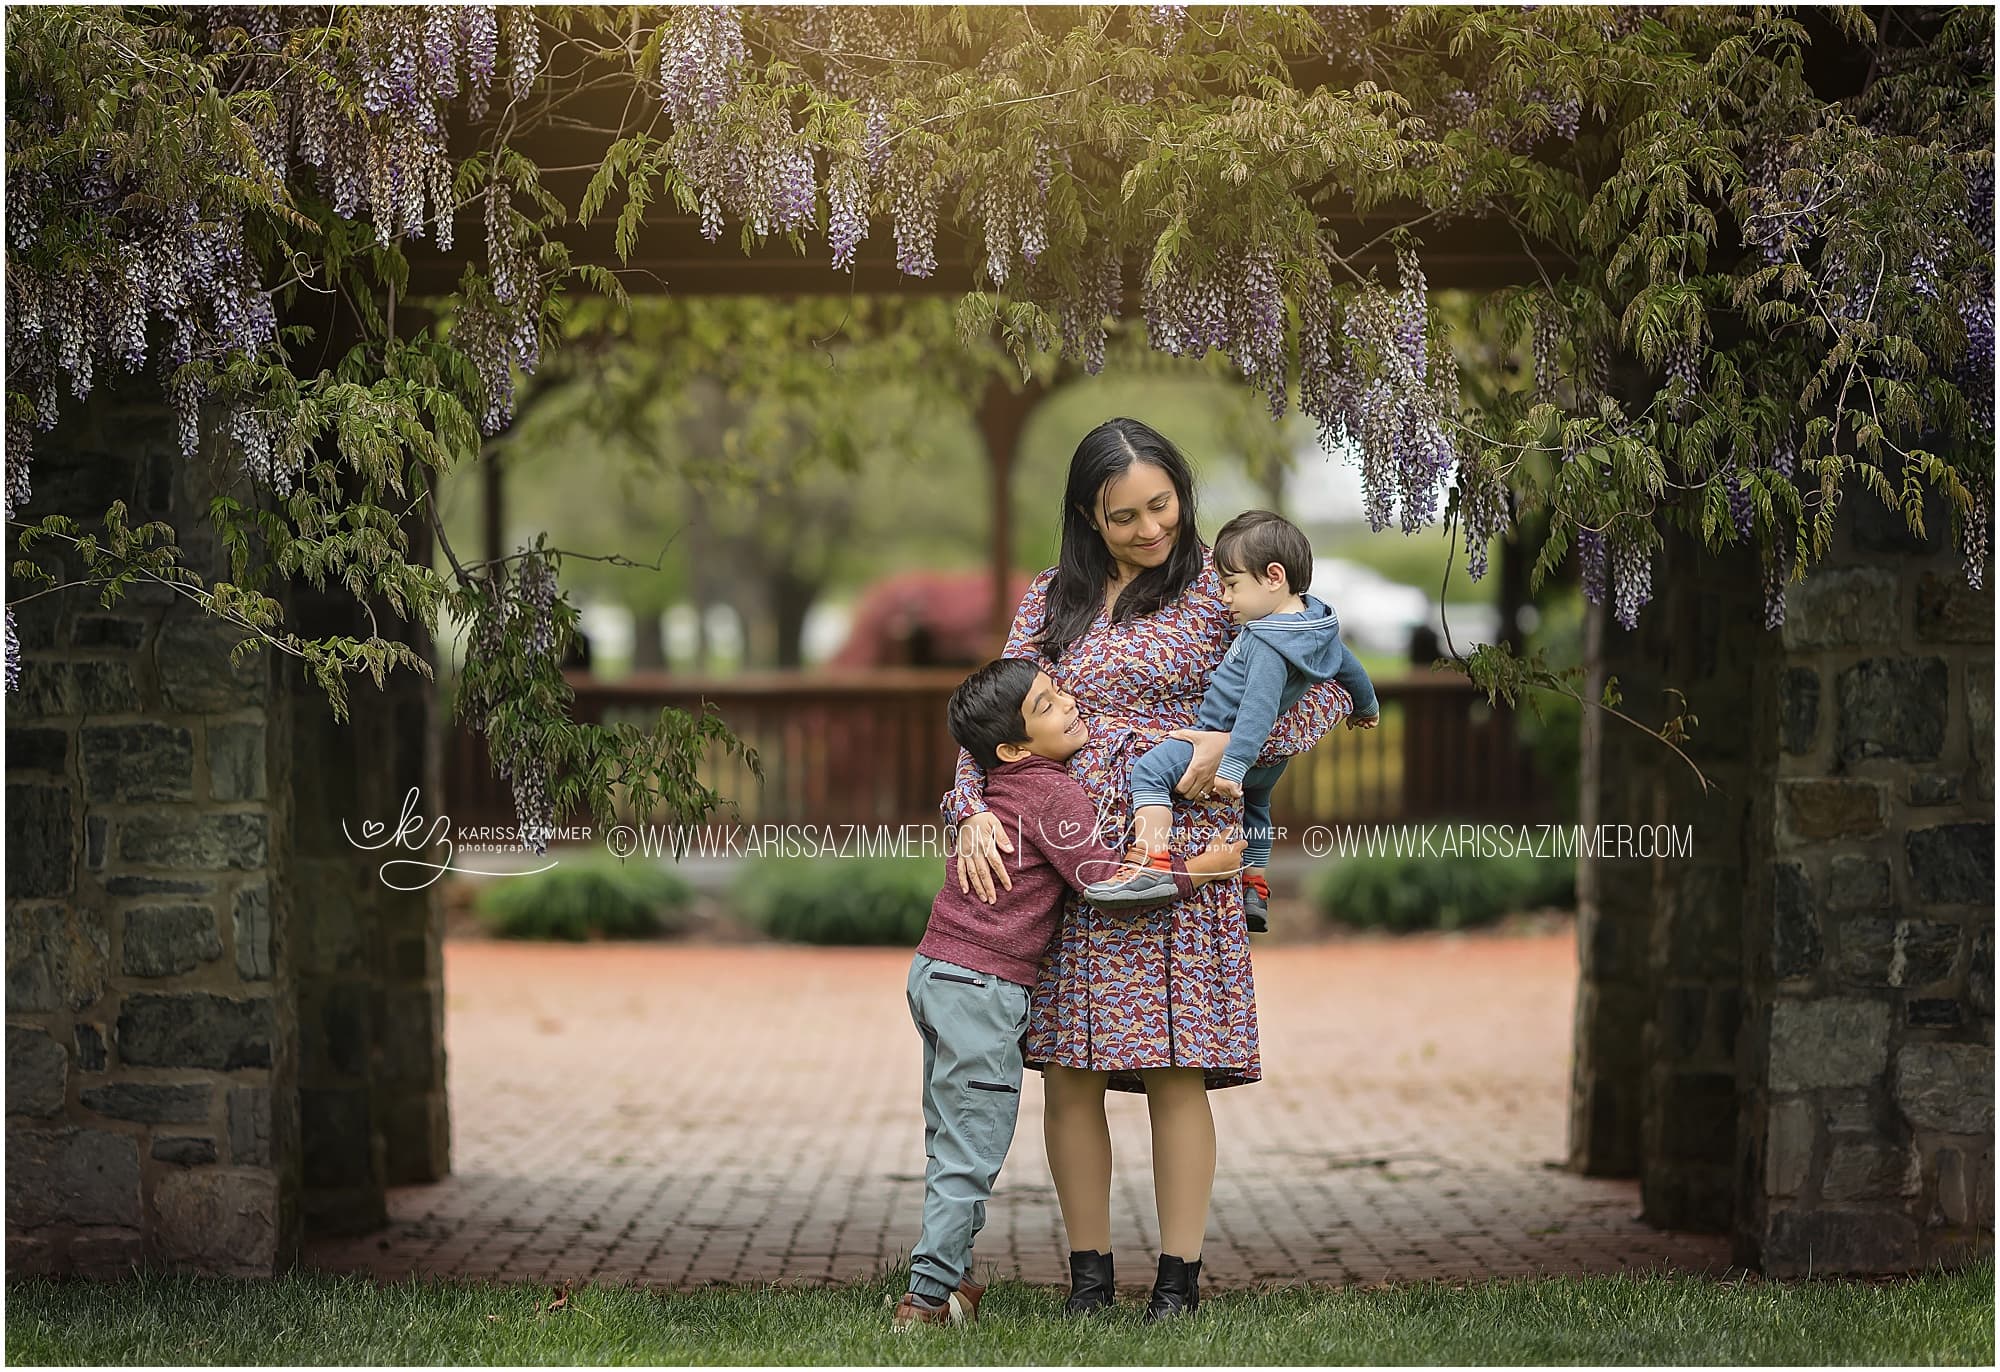 Mother and sons photographed together at outdoor family photography session